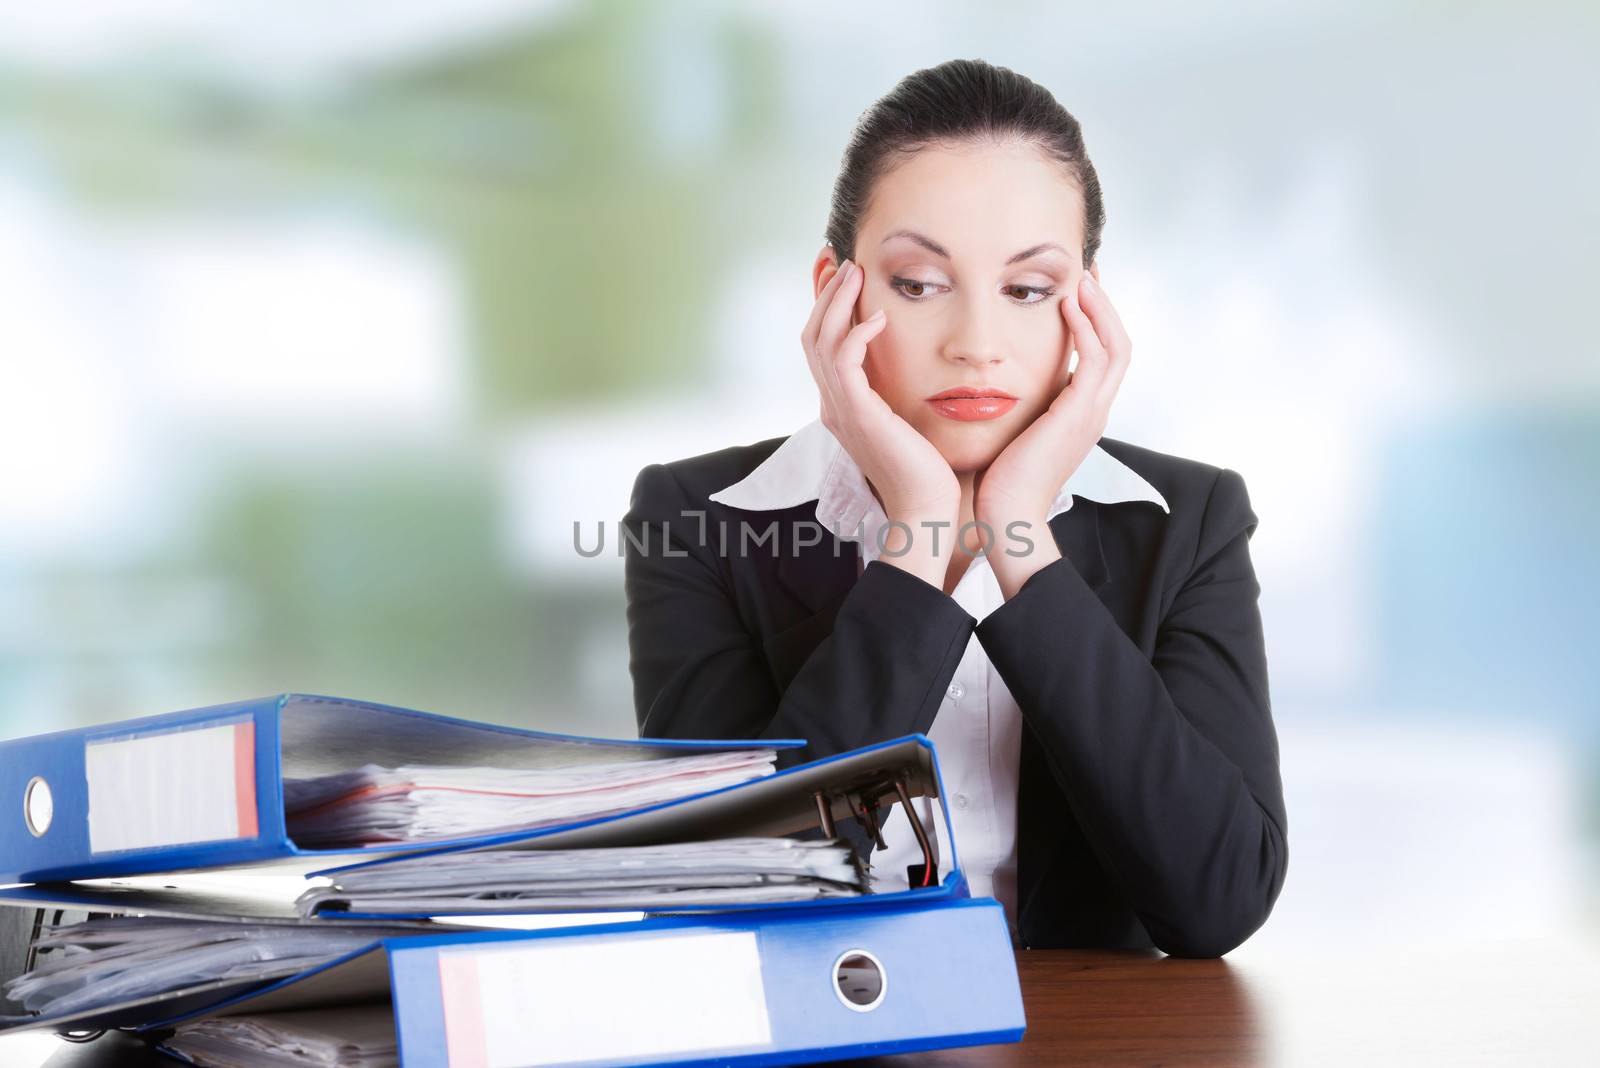 Sad woman with ringbinders sitting at the desk. Tired and exhousted business woman.